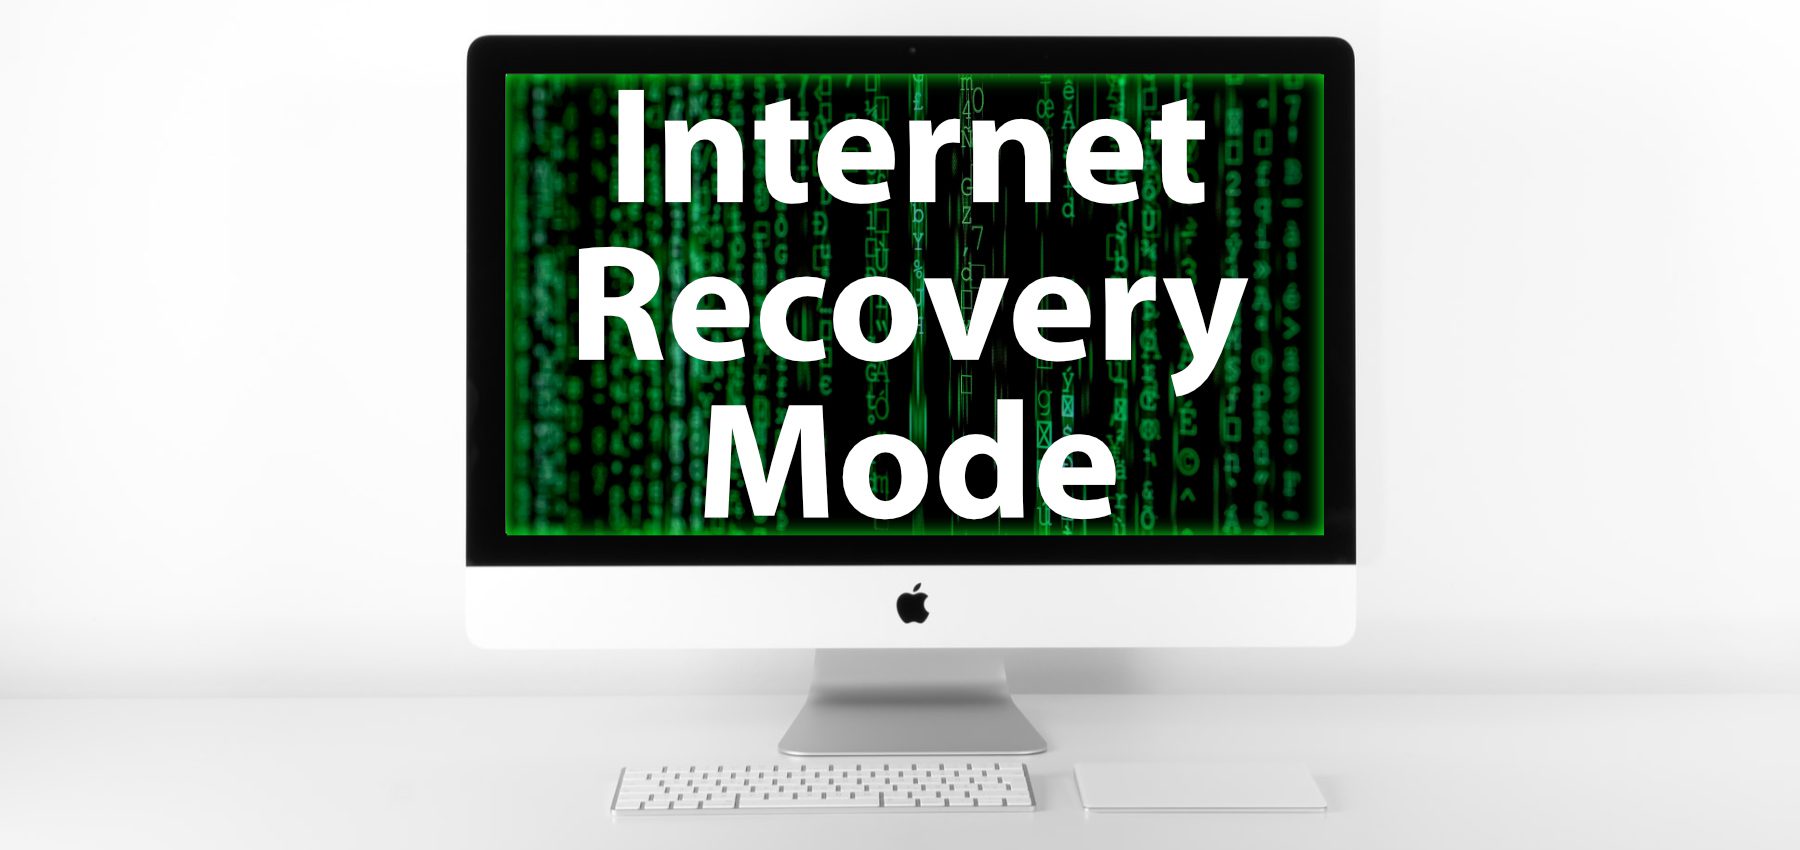 Install macos from internet recovery mac